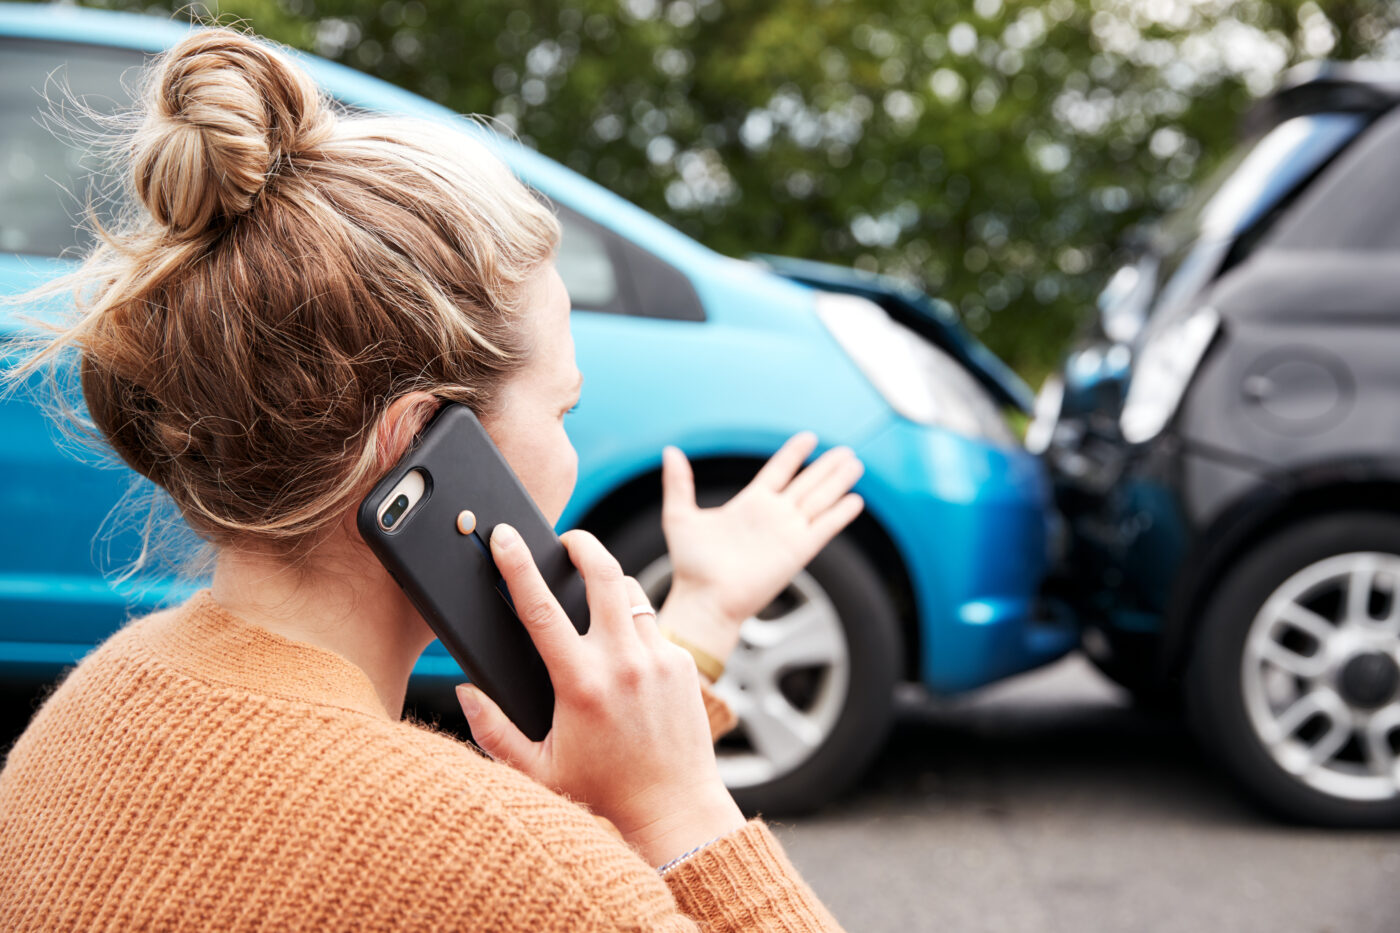 6 Tips for What to Do After a Car Accident